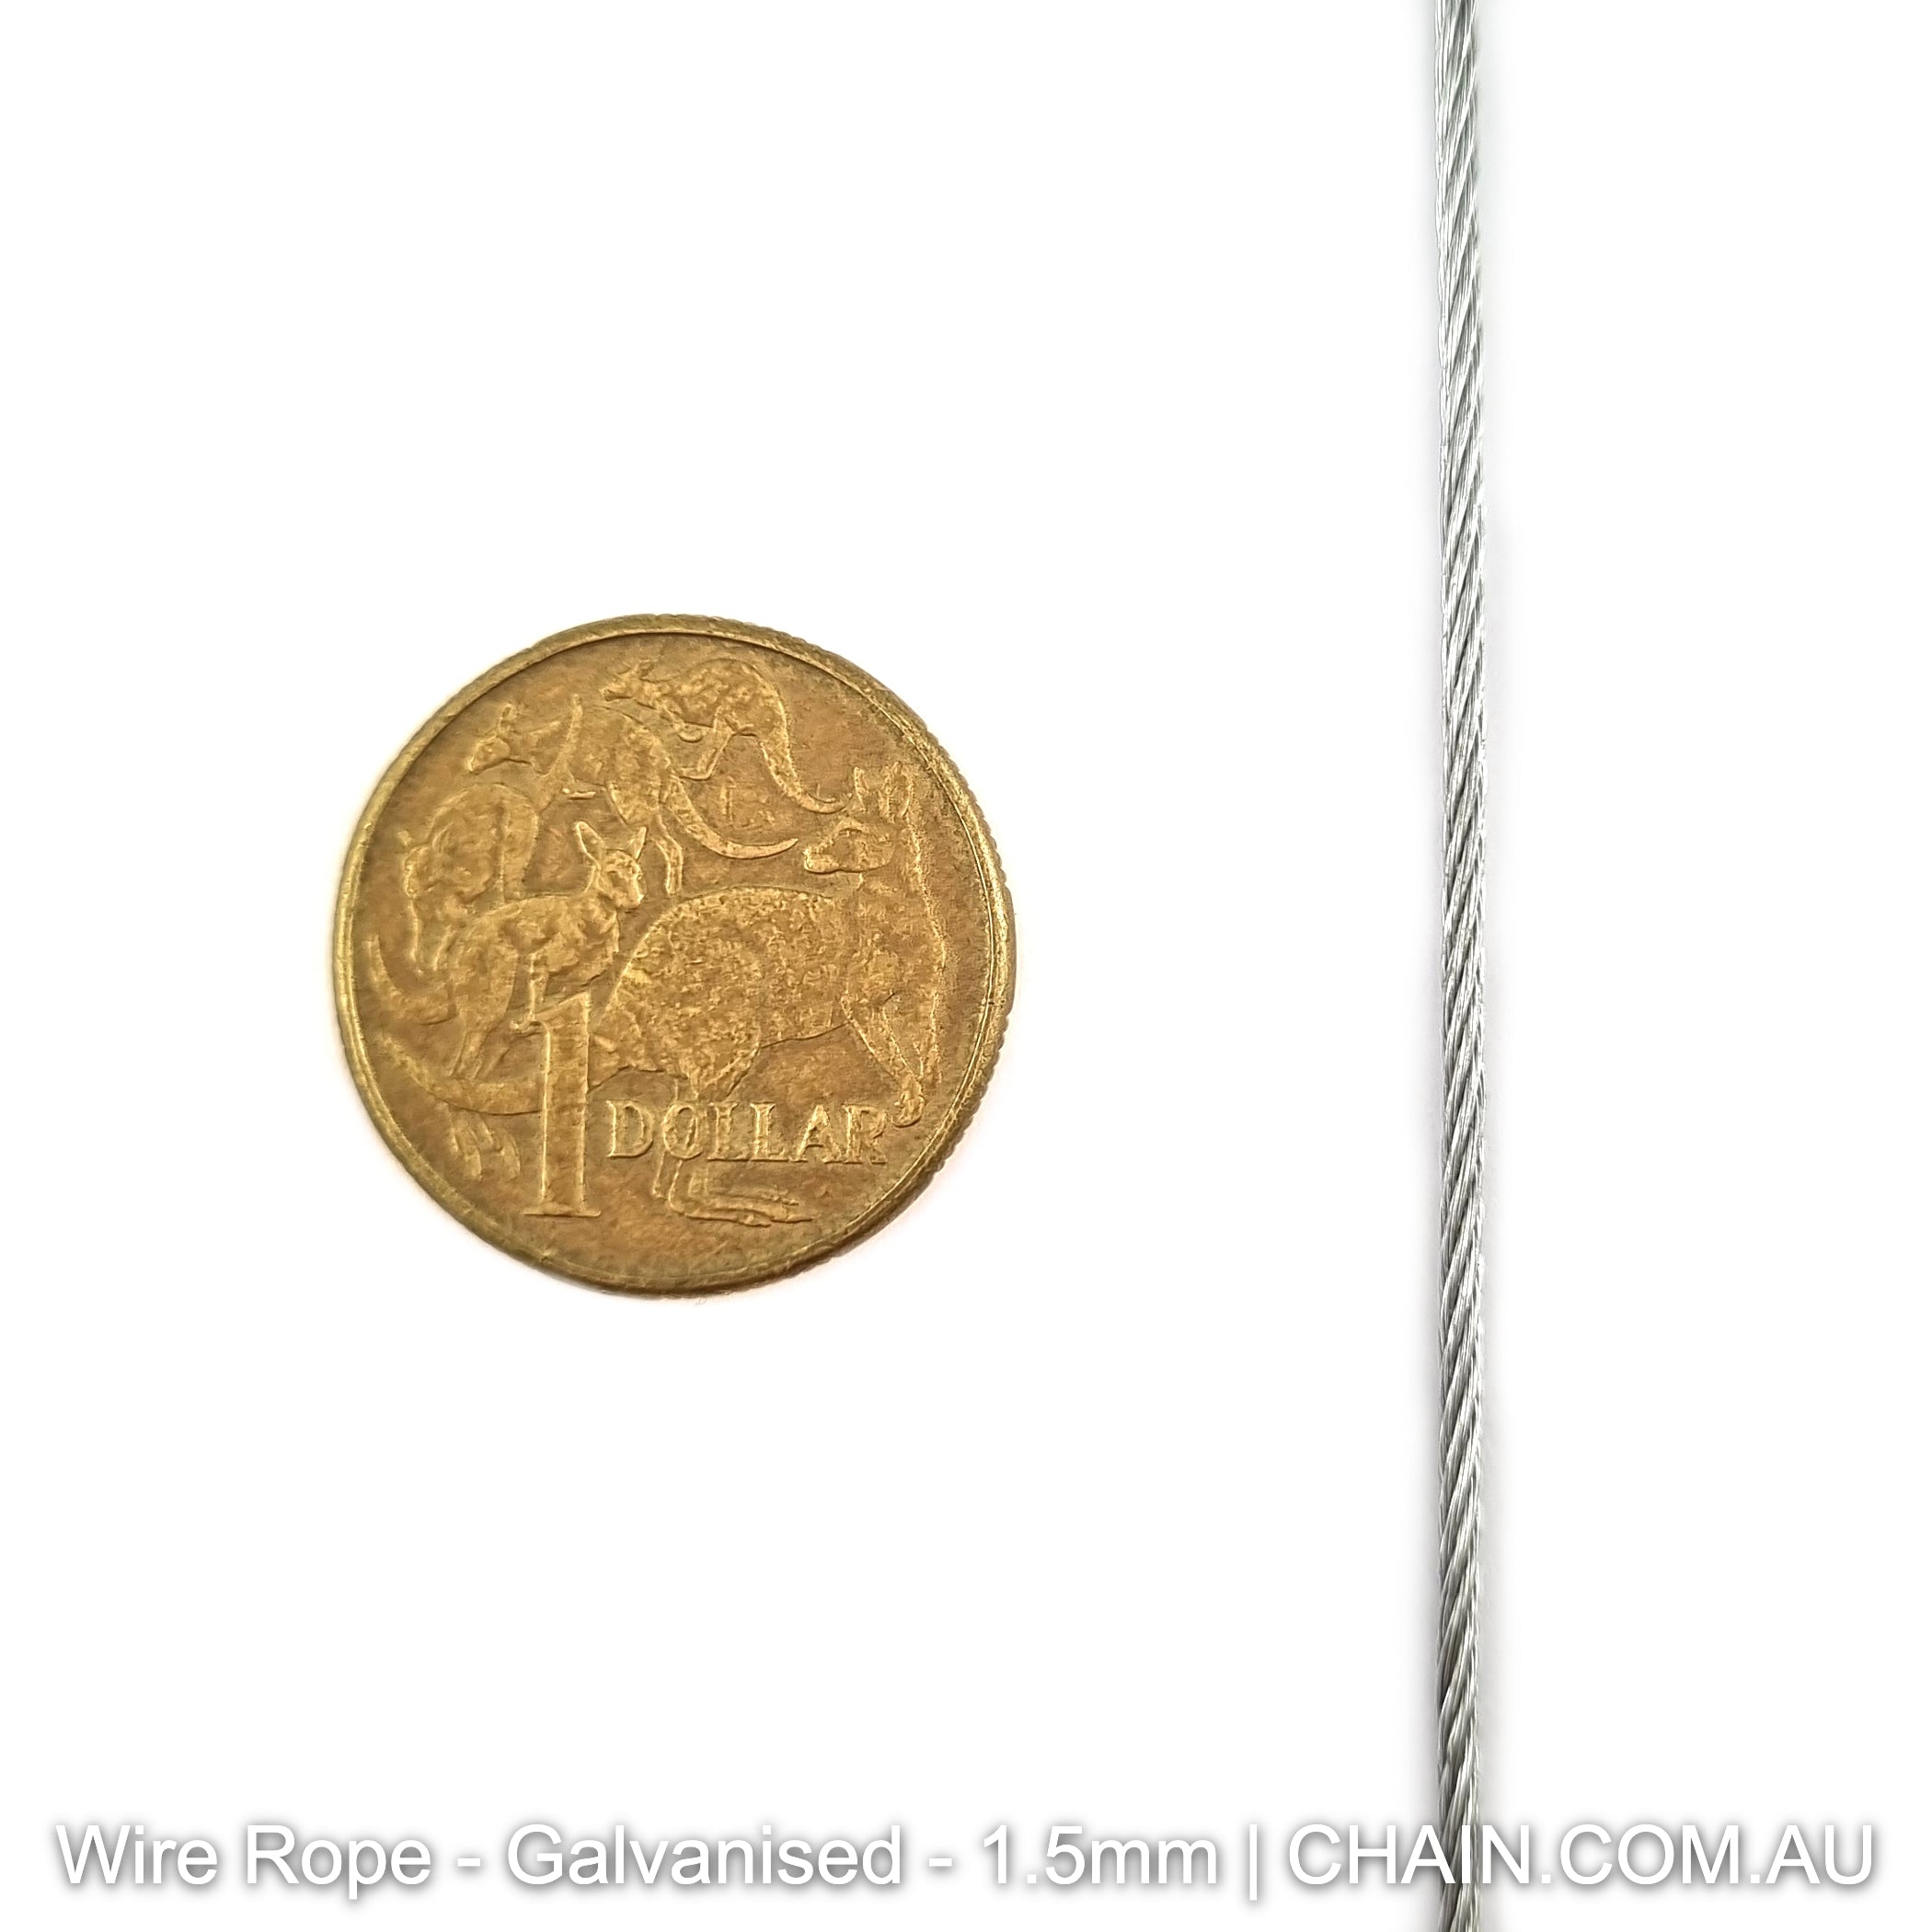 Galvanised wire rope (wire cord, wire cable) Size: 1.5mm. Australia wide shipping. Chain.com.au